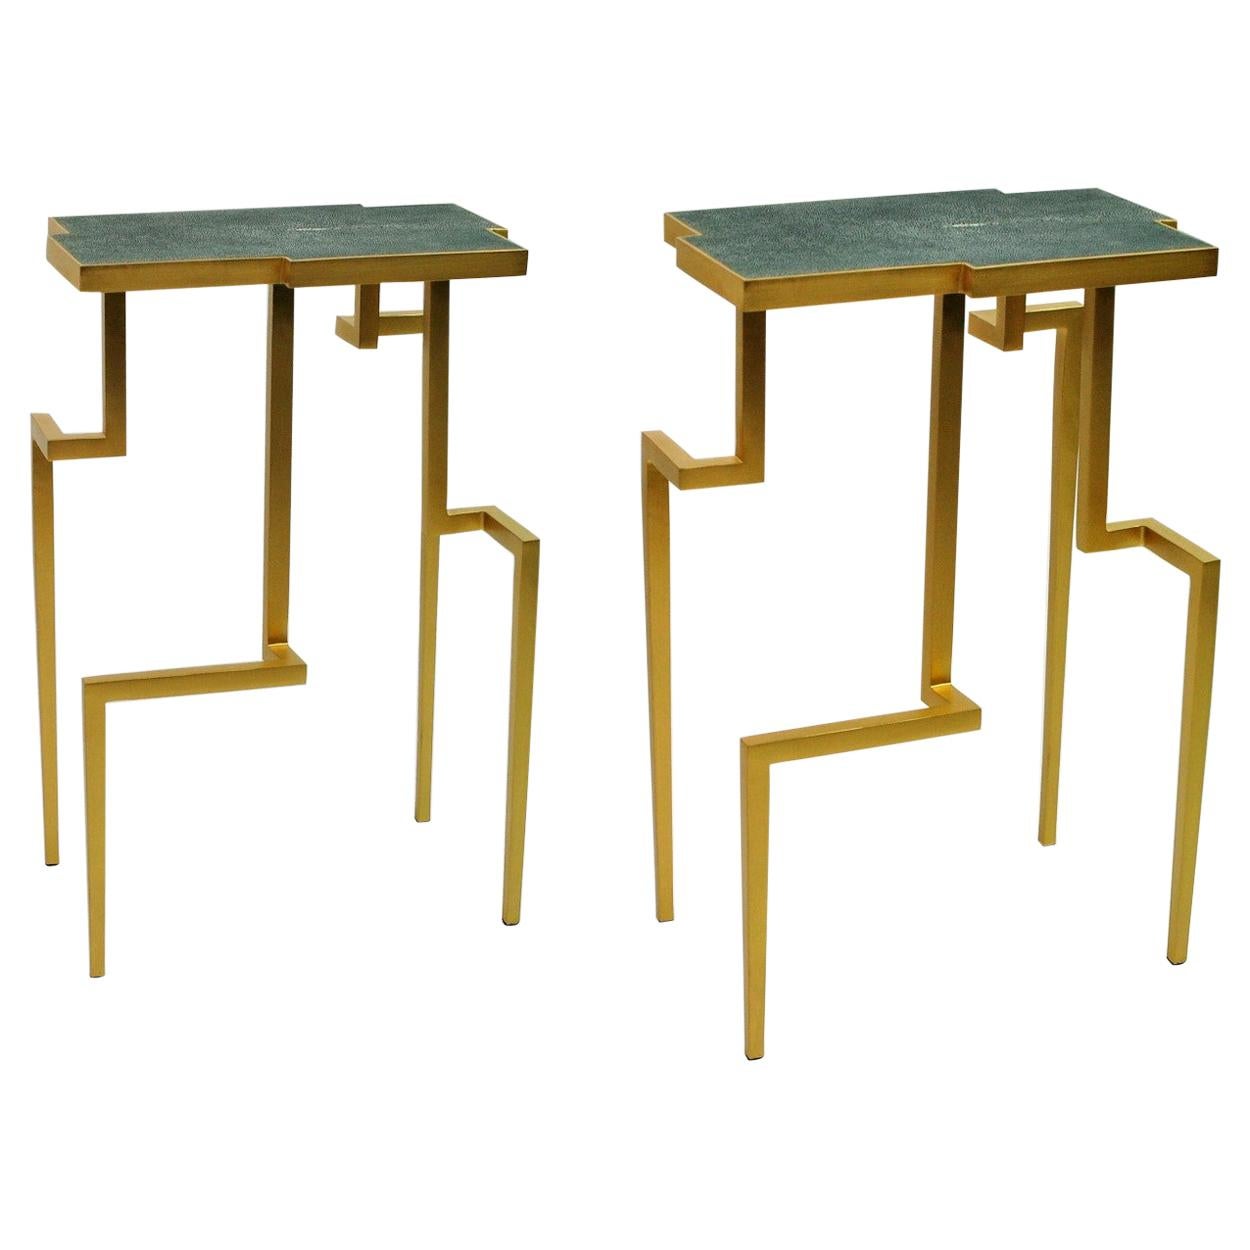 Pair of Side Tables PIXEL in Shagreen and Brass by Ginger Brown